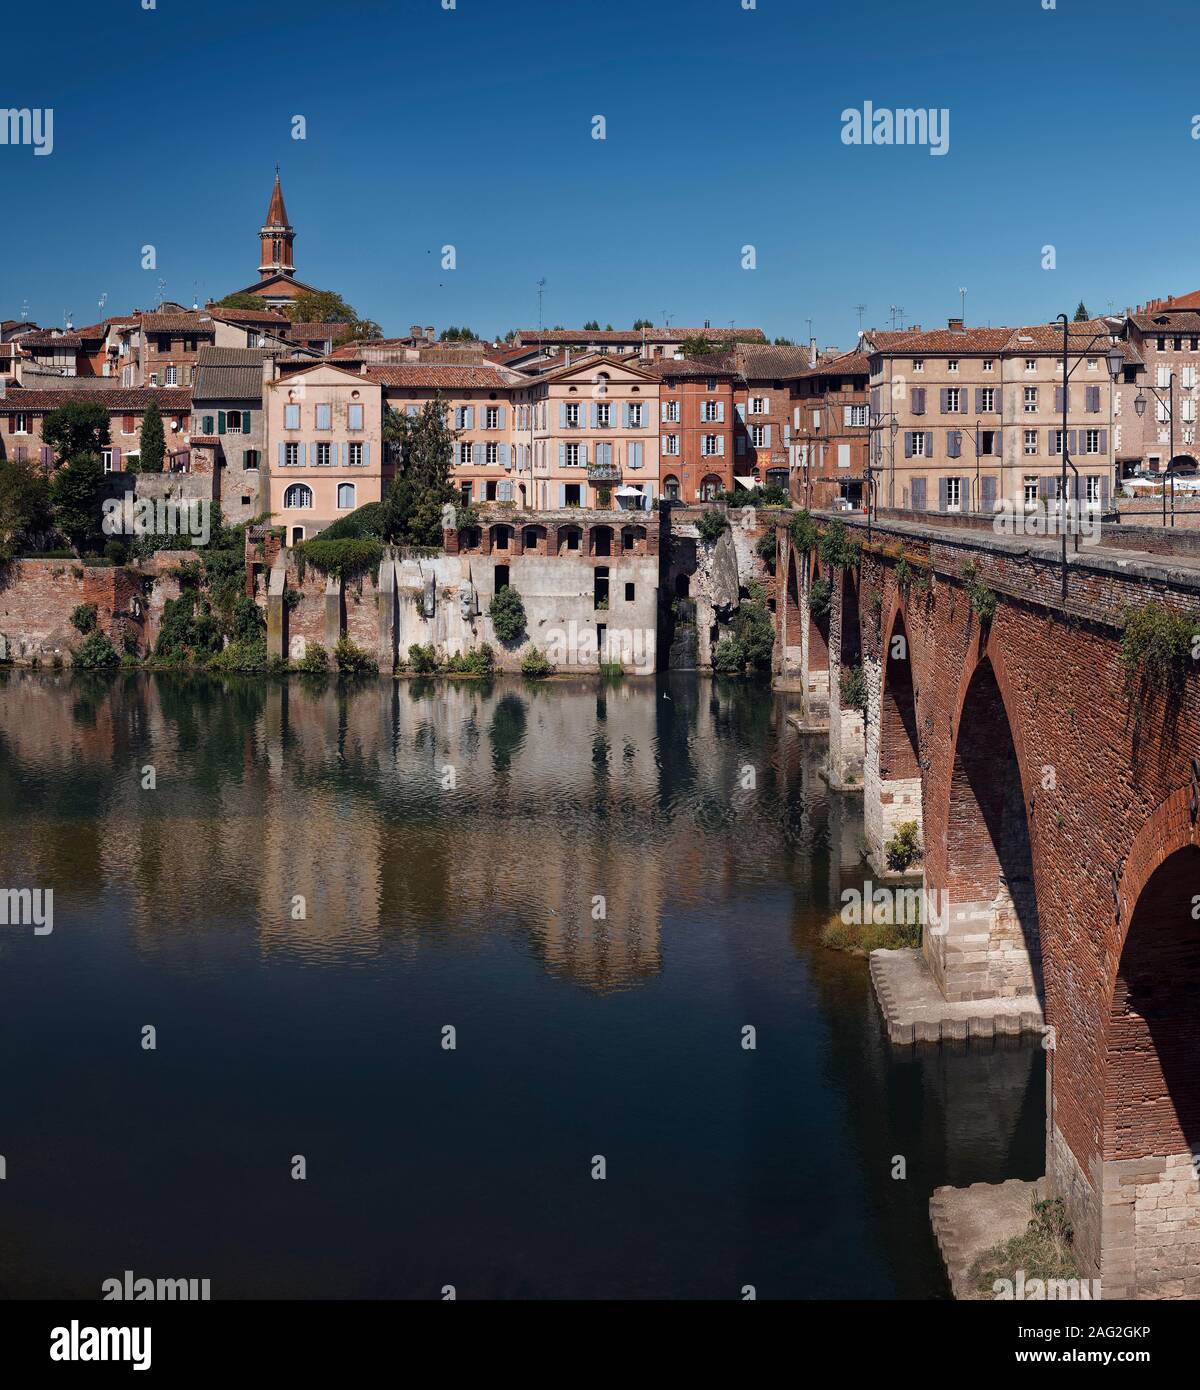 Town of Albi in South of France, historic city architecture with the old bridge Pont Vieux over the river Tarn. Stock Photo